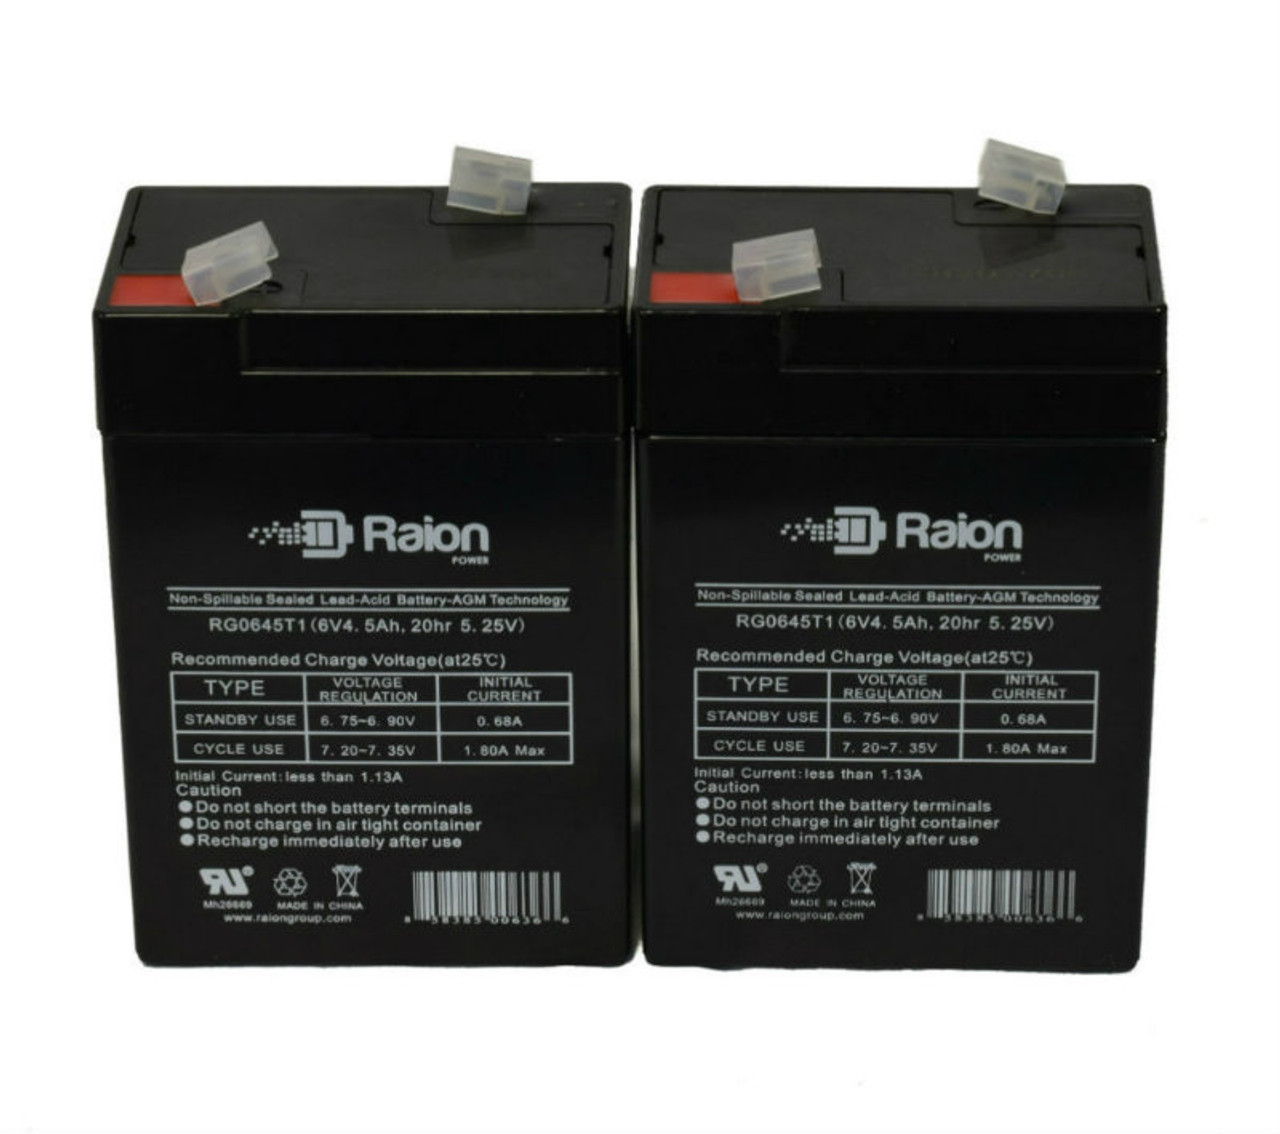 Raion Power 6 Volt 4.5Ah RG0645T1 Replacement Battery for FIAMM FG10501 - 2 Pack